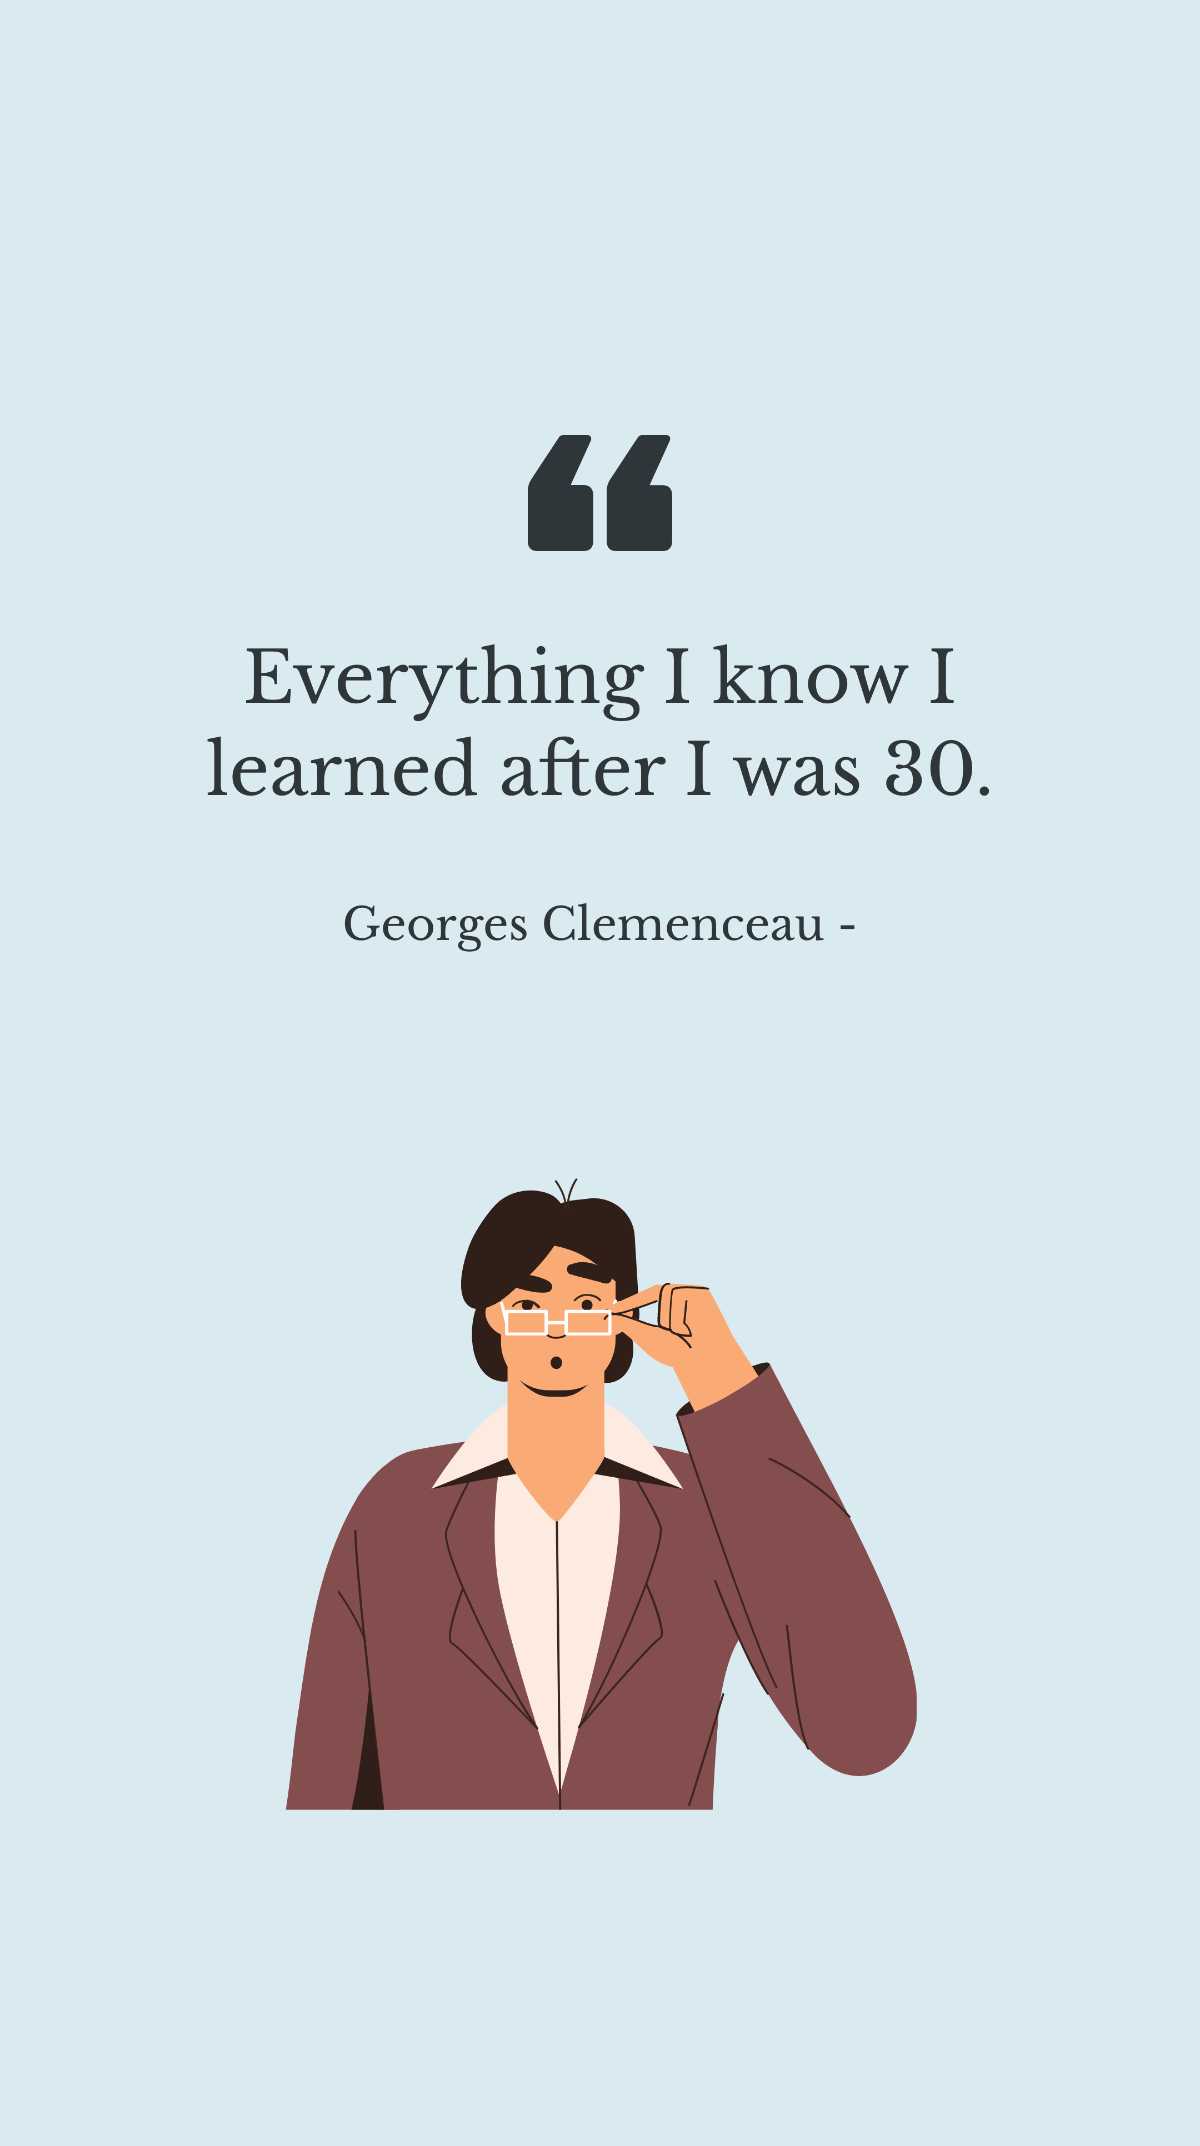 Georges Clemenceau - Everything I know I learned after I was 30. Template